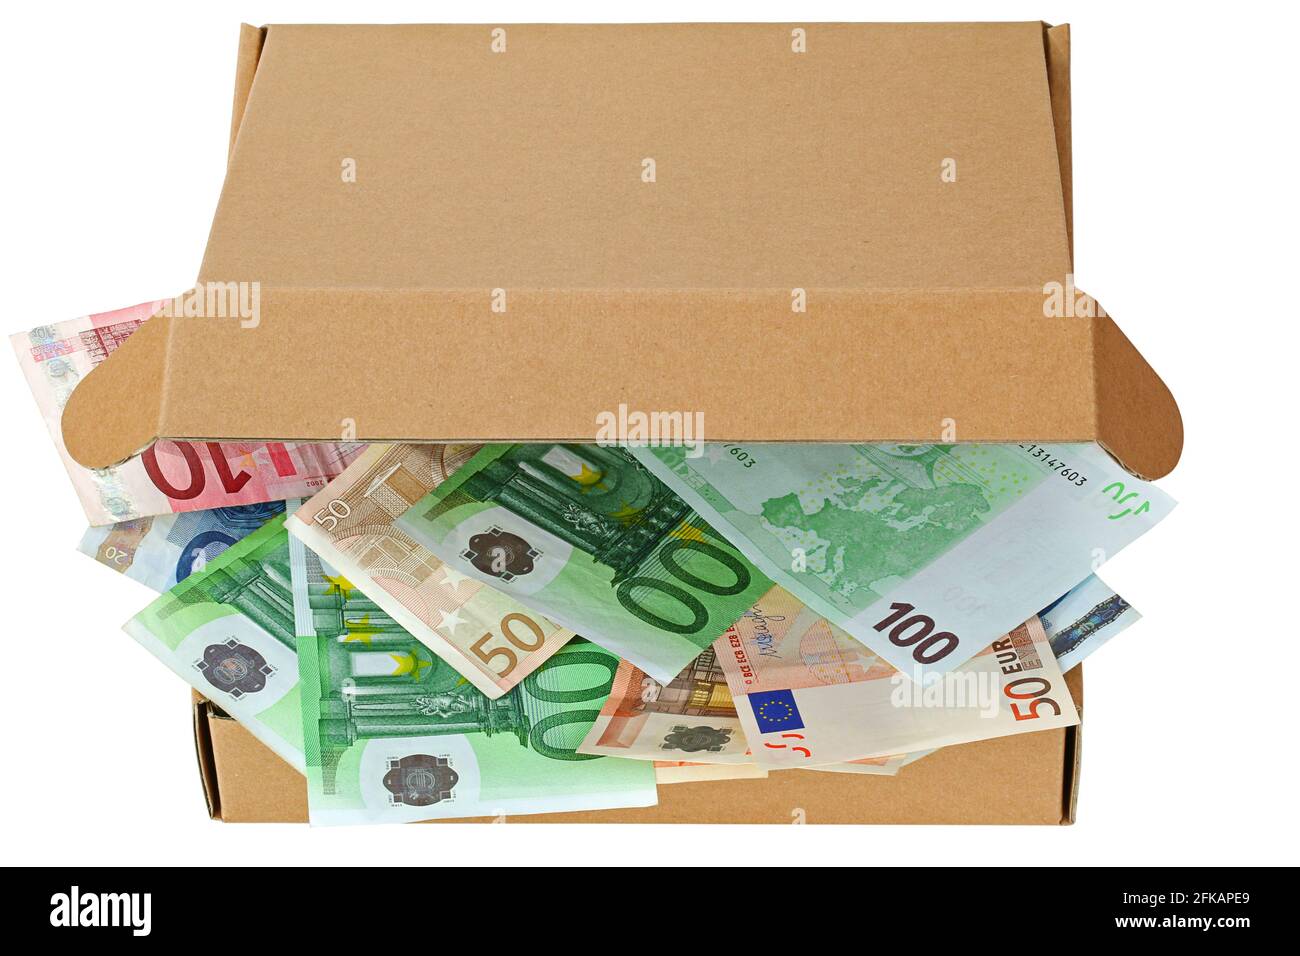 A brown pizza box partially opened full of Euro banknotes isolated on white Stock Photo